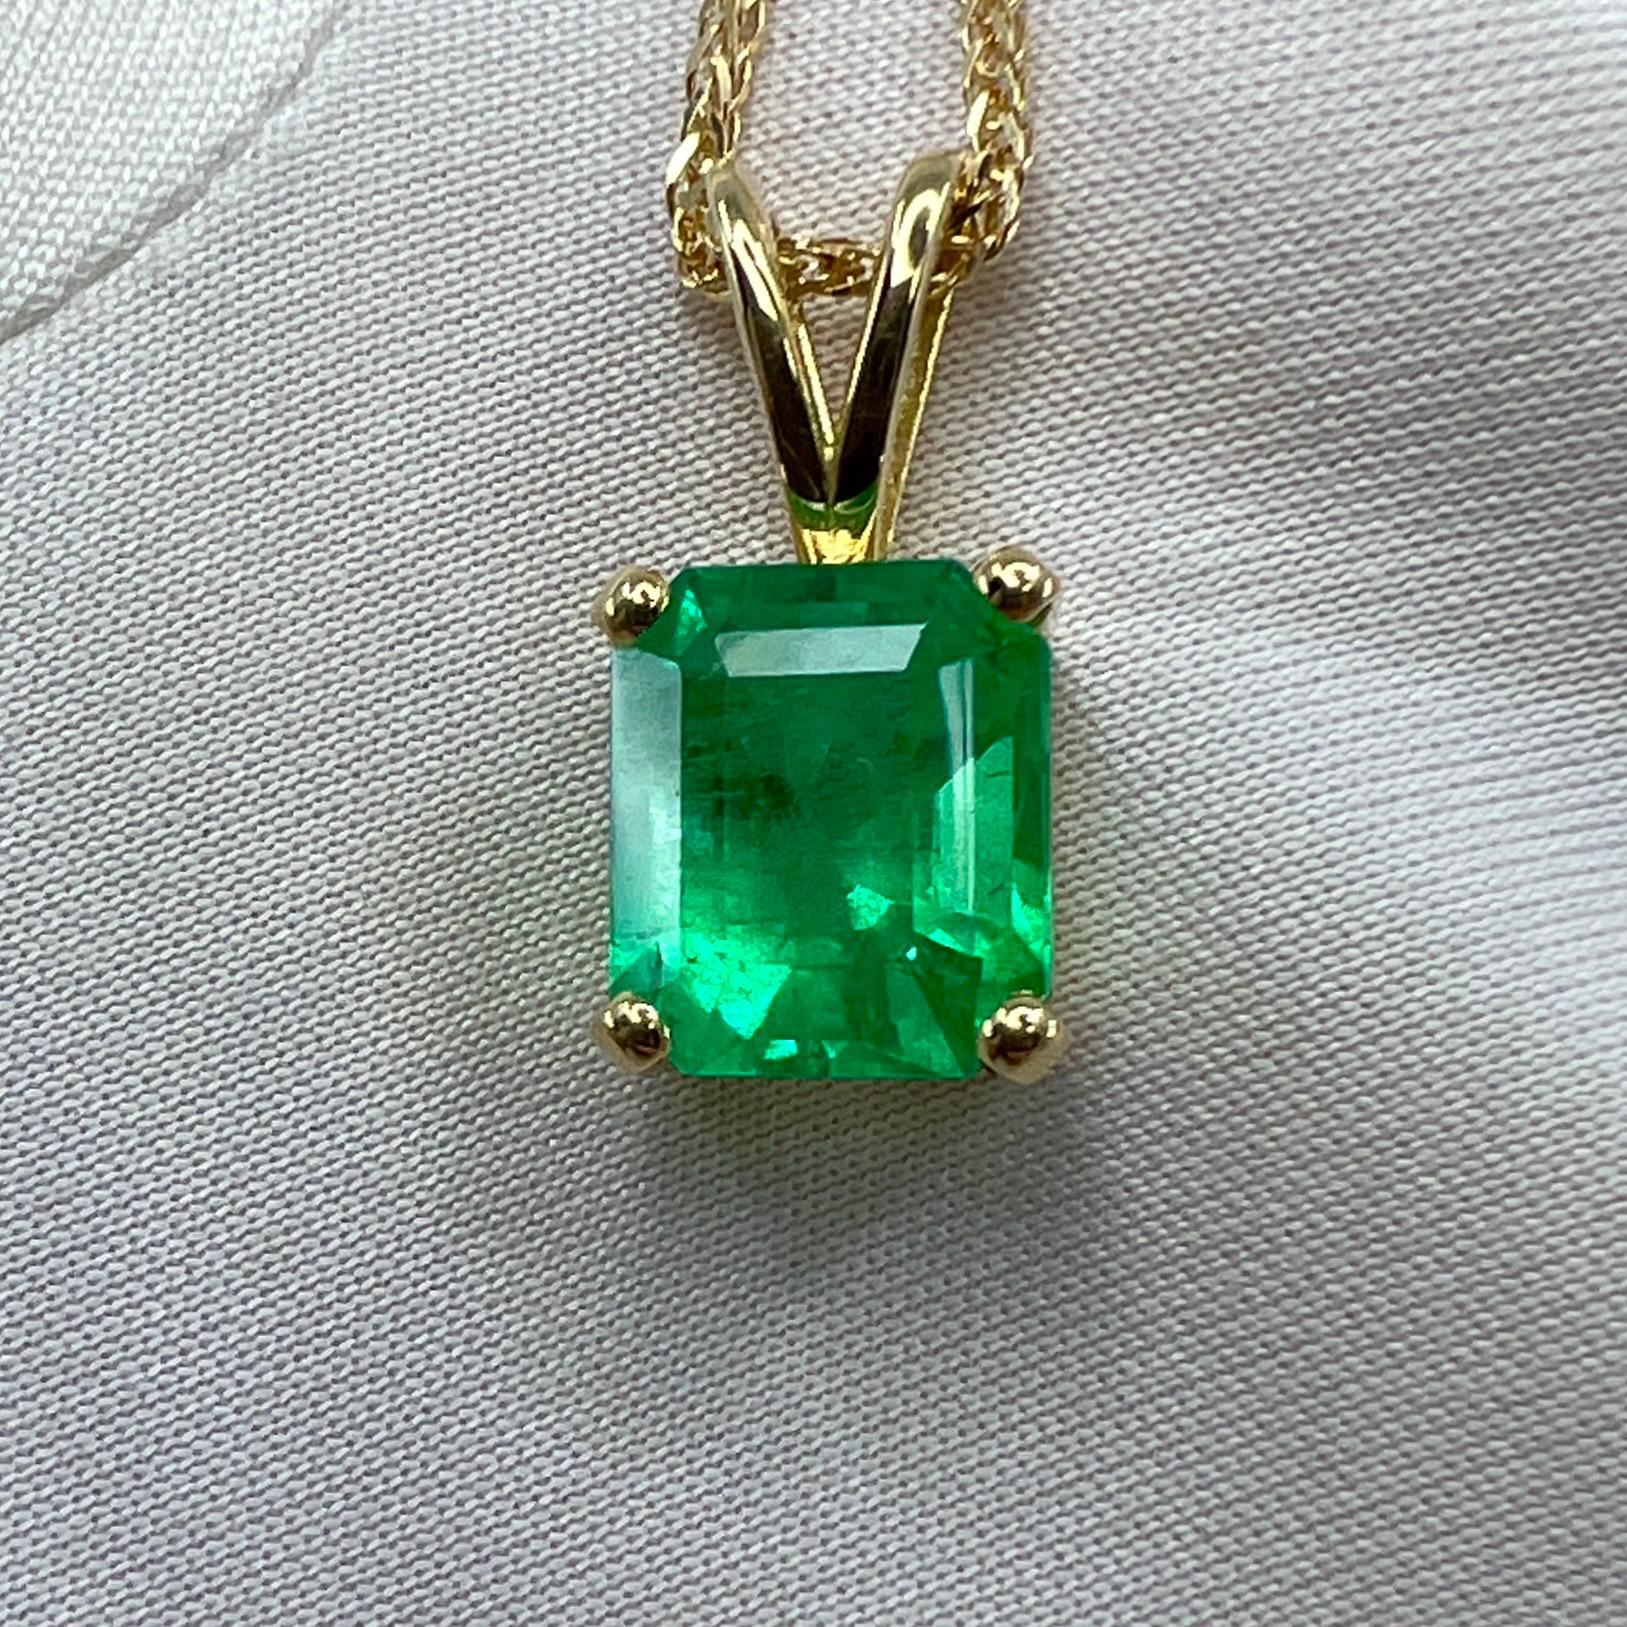 Fine Vivid Green Colombian Emerald 18k Yellow Gold Solitaire Pendant Necklace.

Beautiful bright green emerald set in a fine 18 karat yellow gold solitaire pendant.
Large 3.32 carat emerald fully certified by GIA confirming stone as natural and